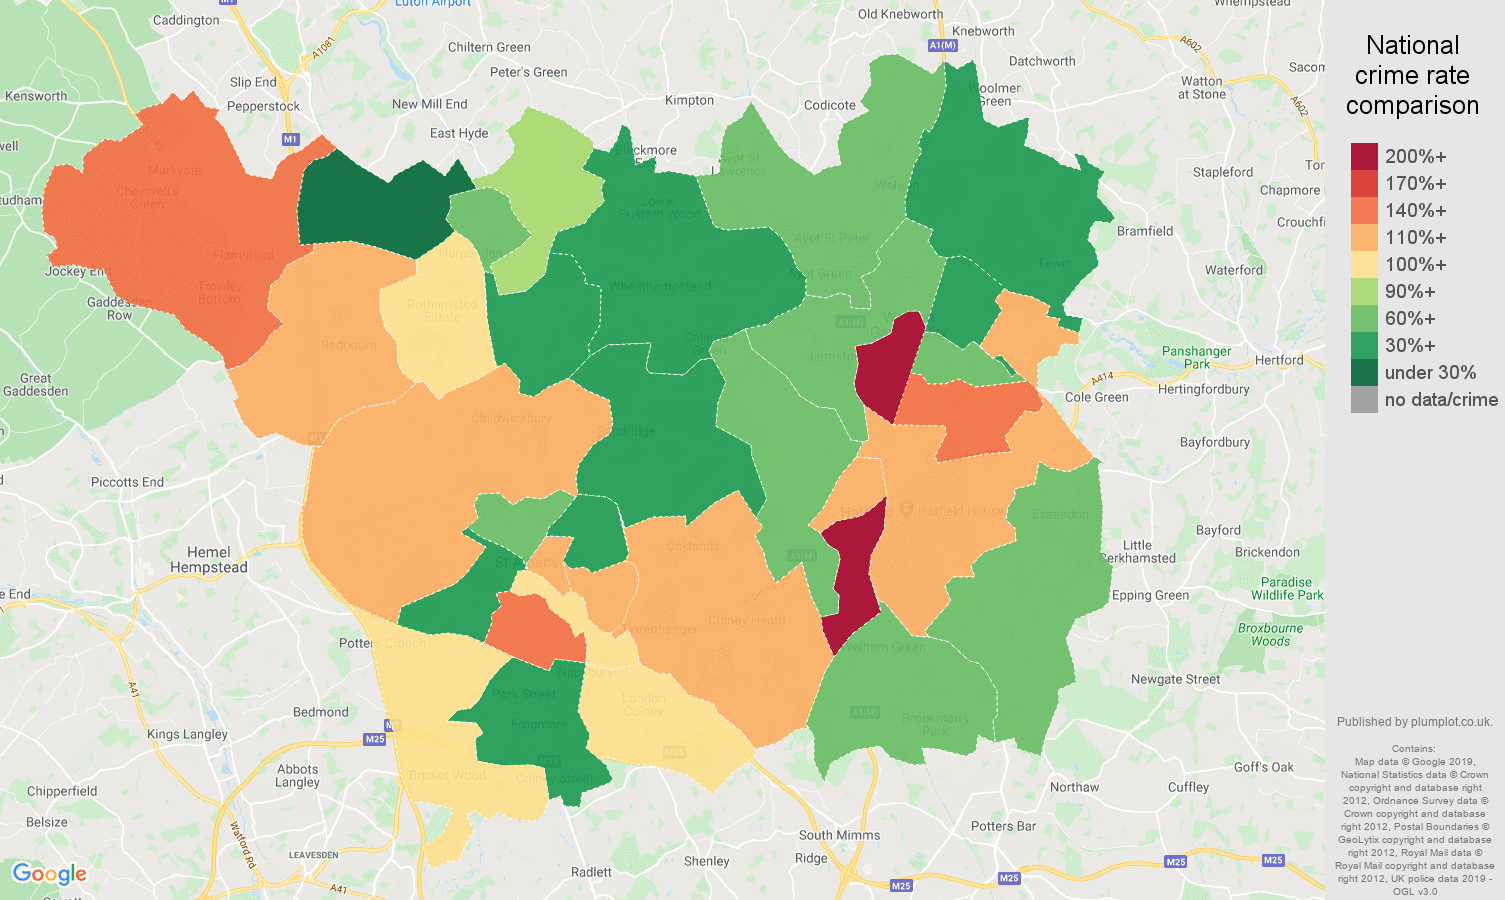 St Albans other crime rate comparison map